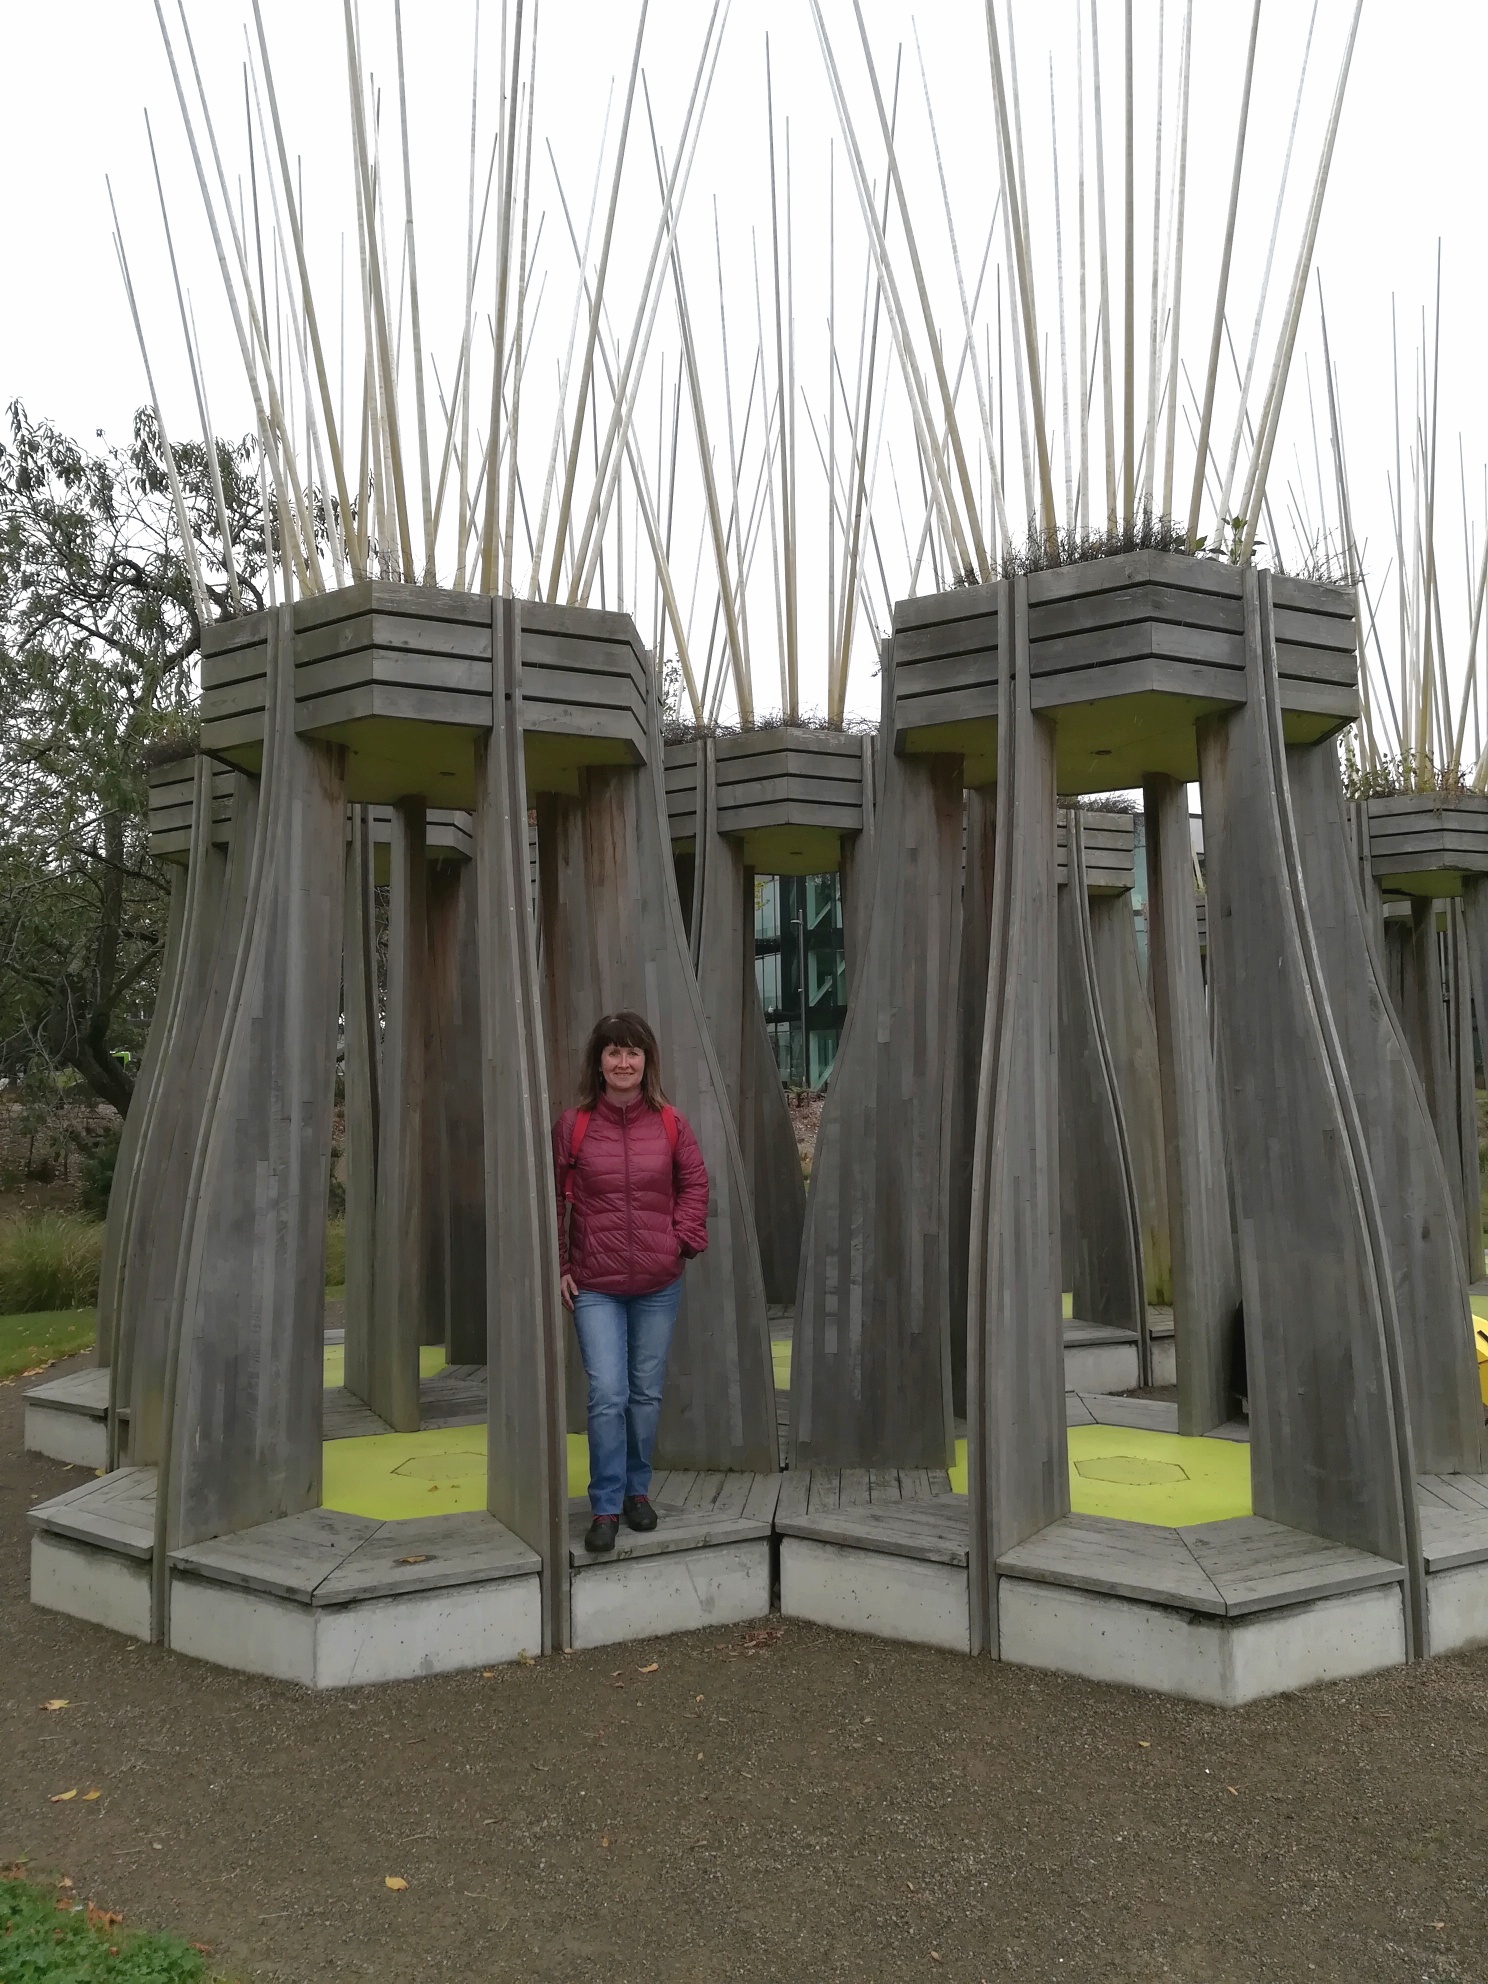 Me at Tree Houses for Swamp Dwellers Exhibit, Christchurch